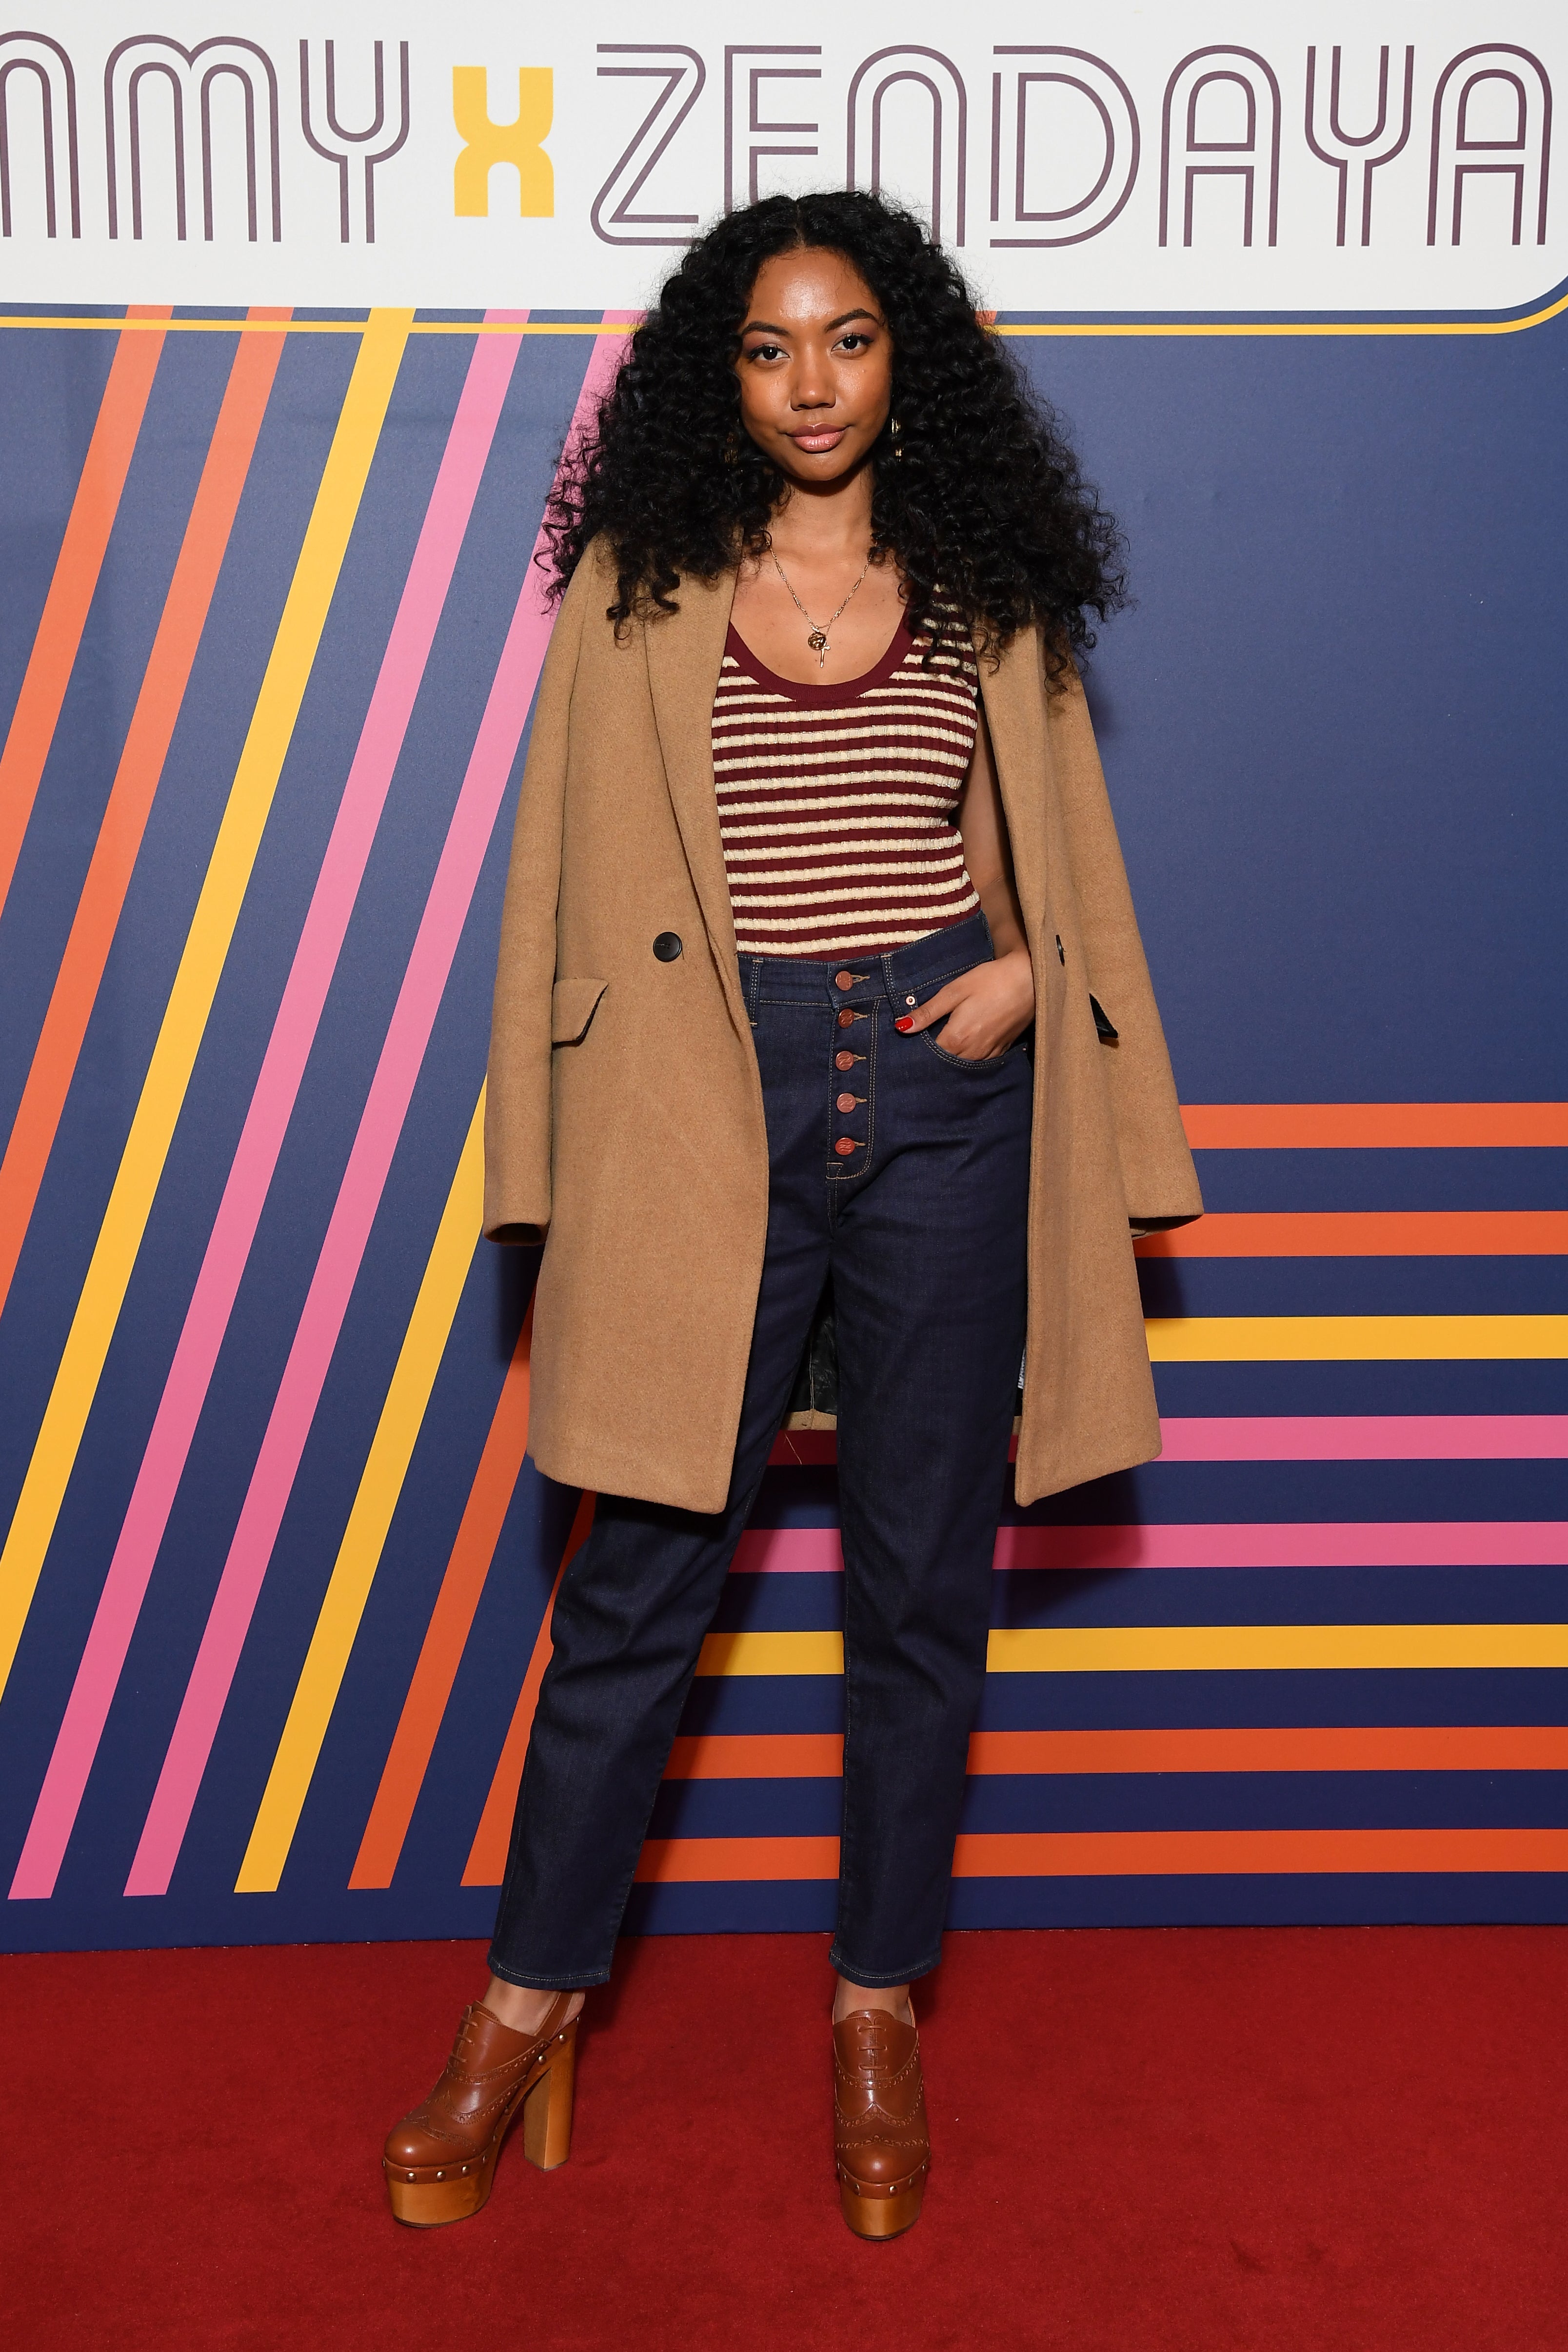 Zendaya, Yara Shahidi, Janelle Monae, And More Celebs Out And About